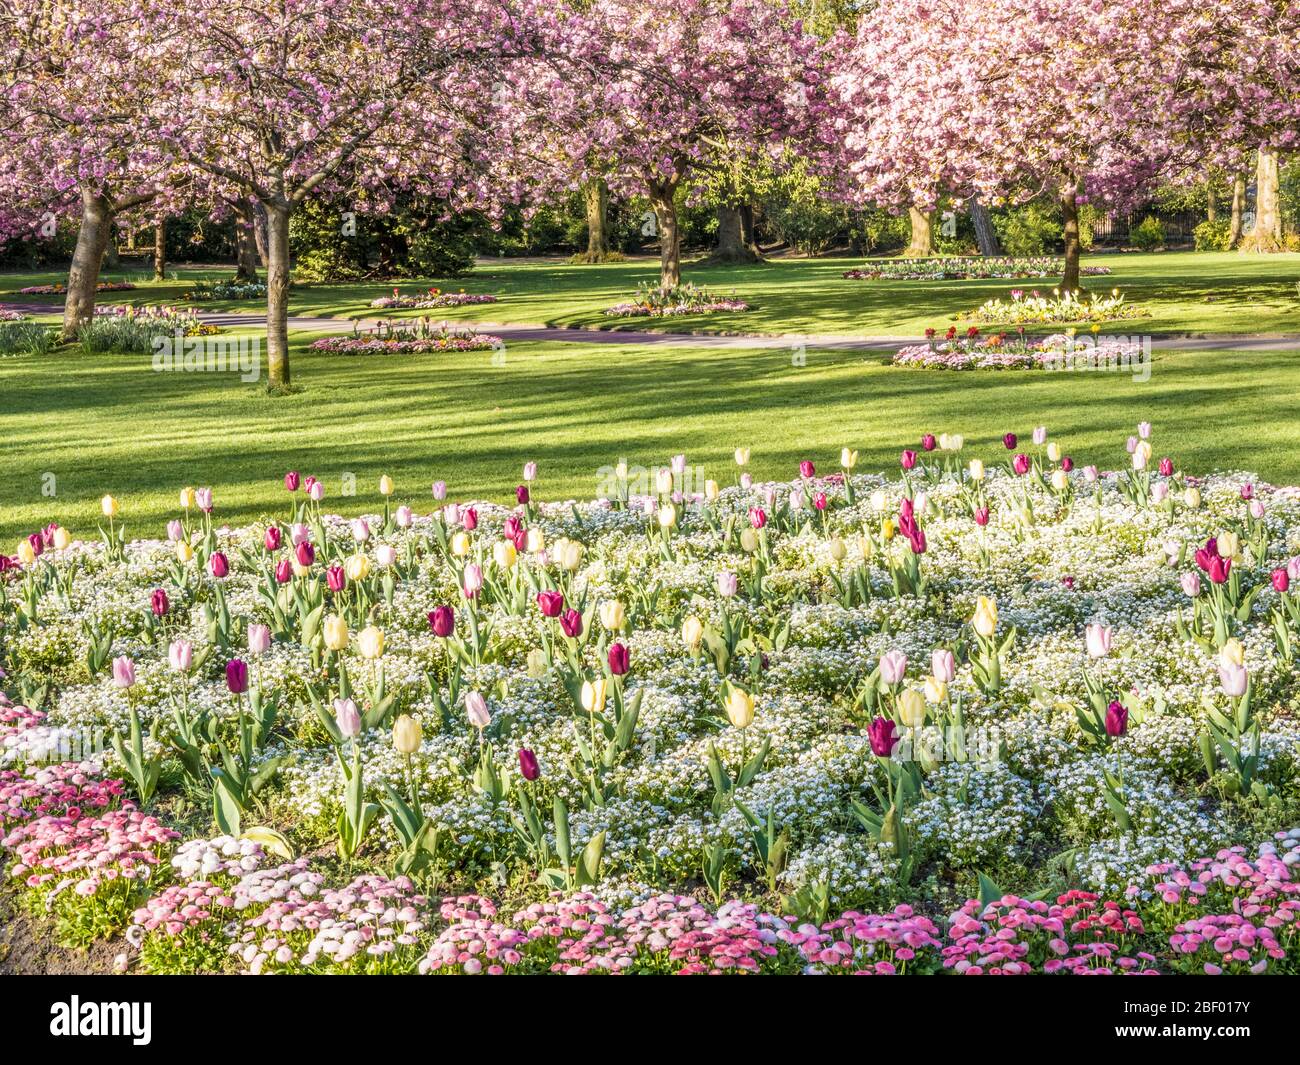 A bed of tulips, white alyssum and pink Bellis daisies with flowering pink cherry trees in the background in an urban public park in England. Stock Photo